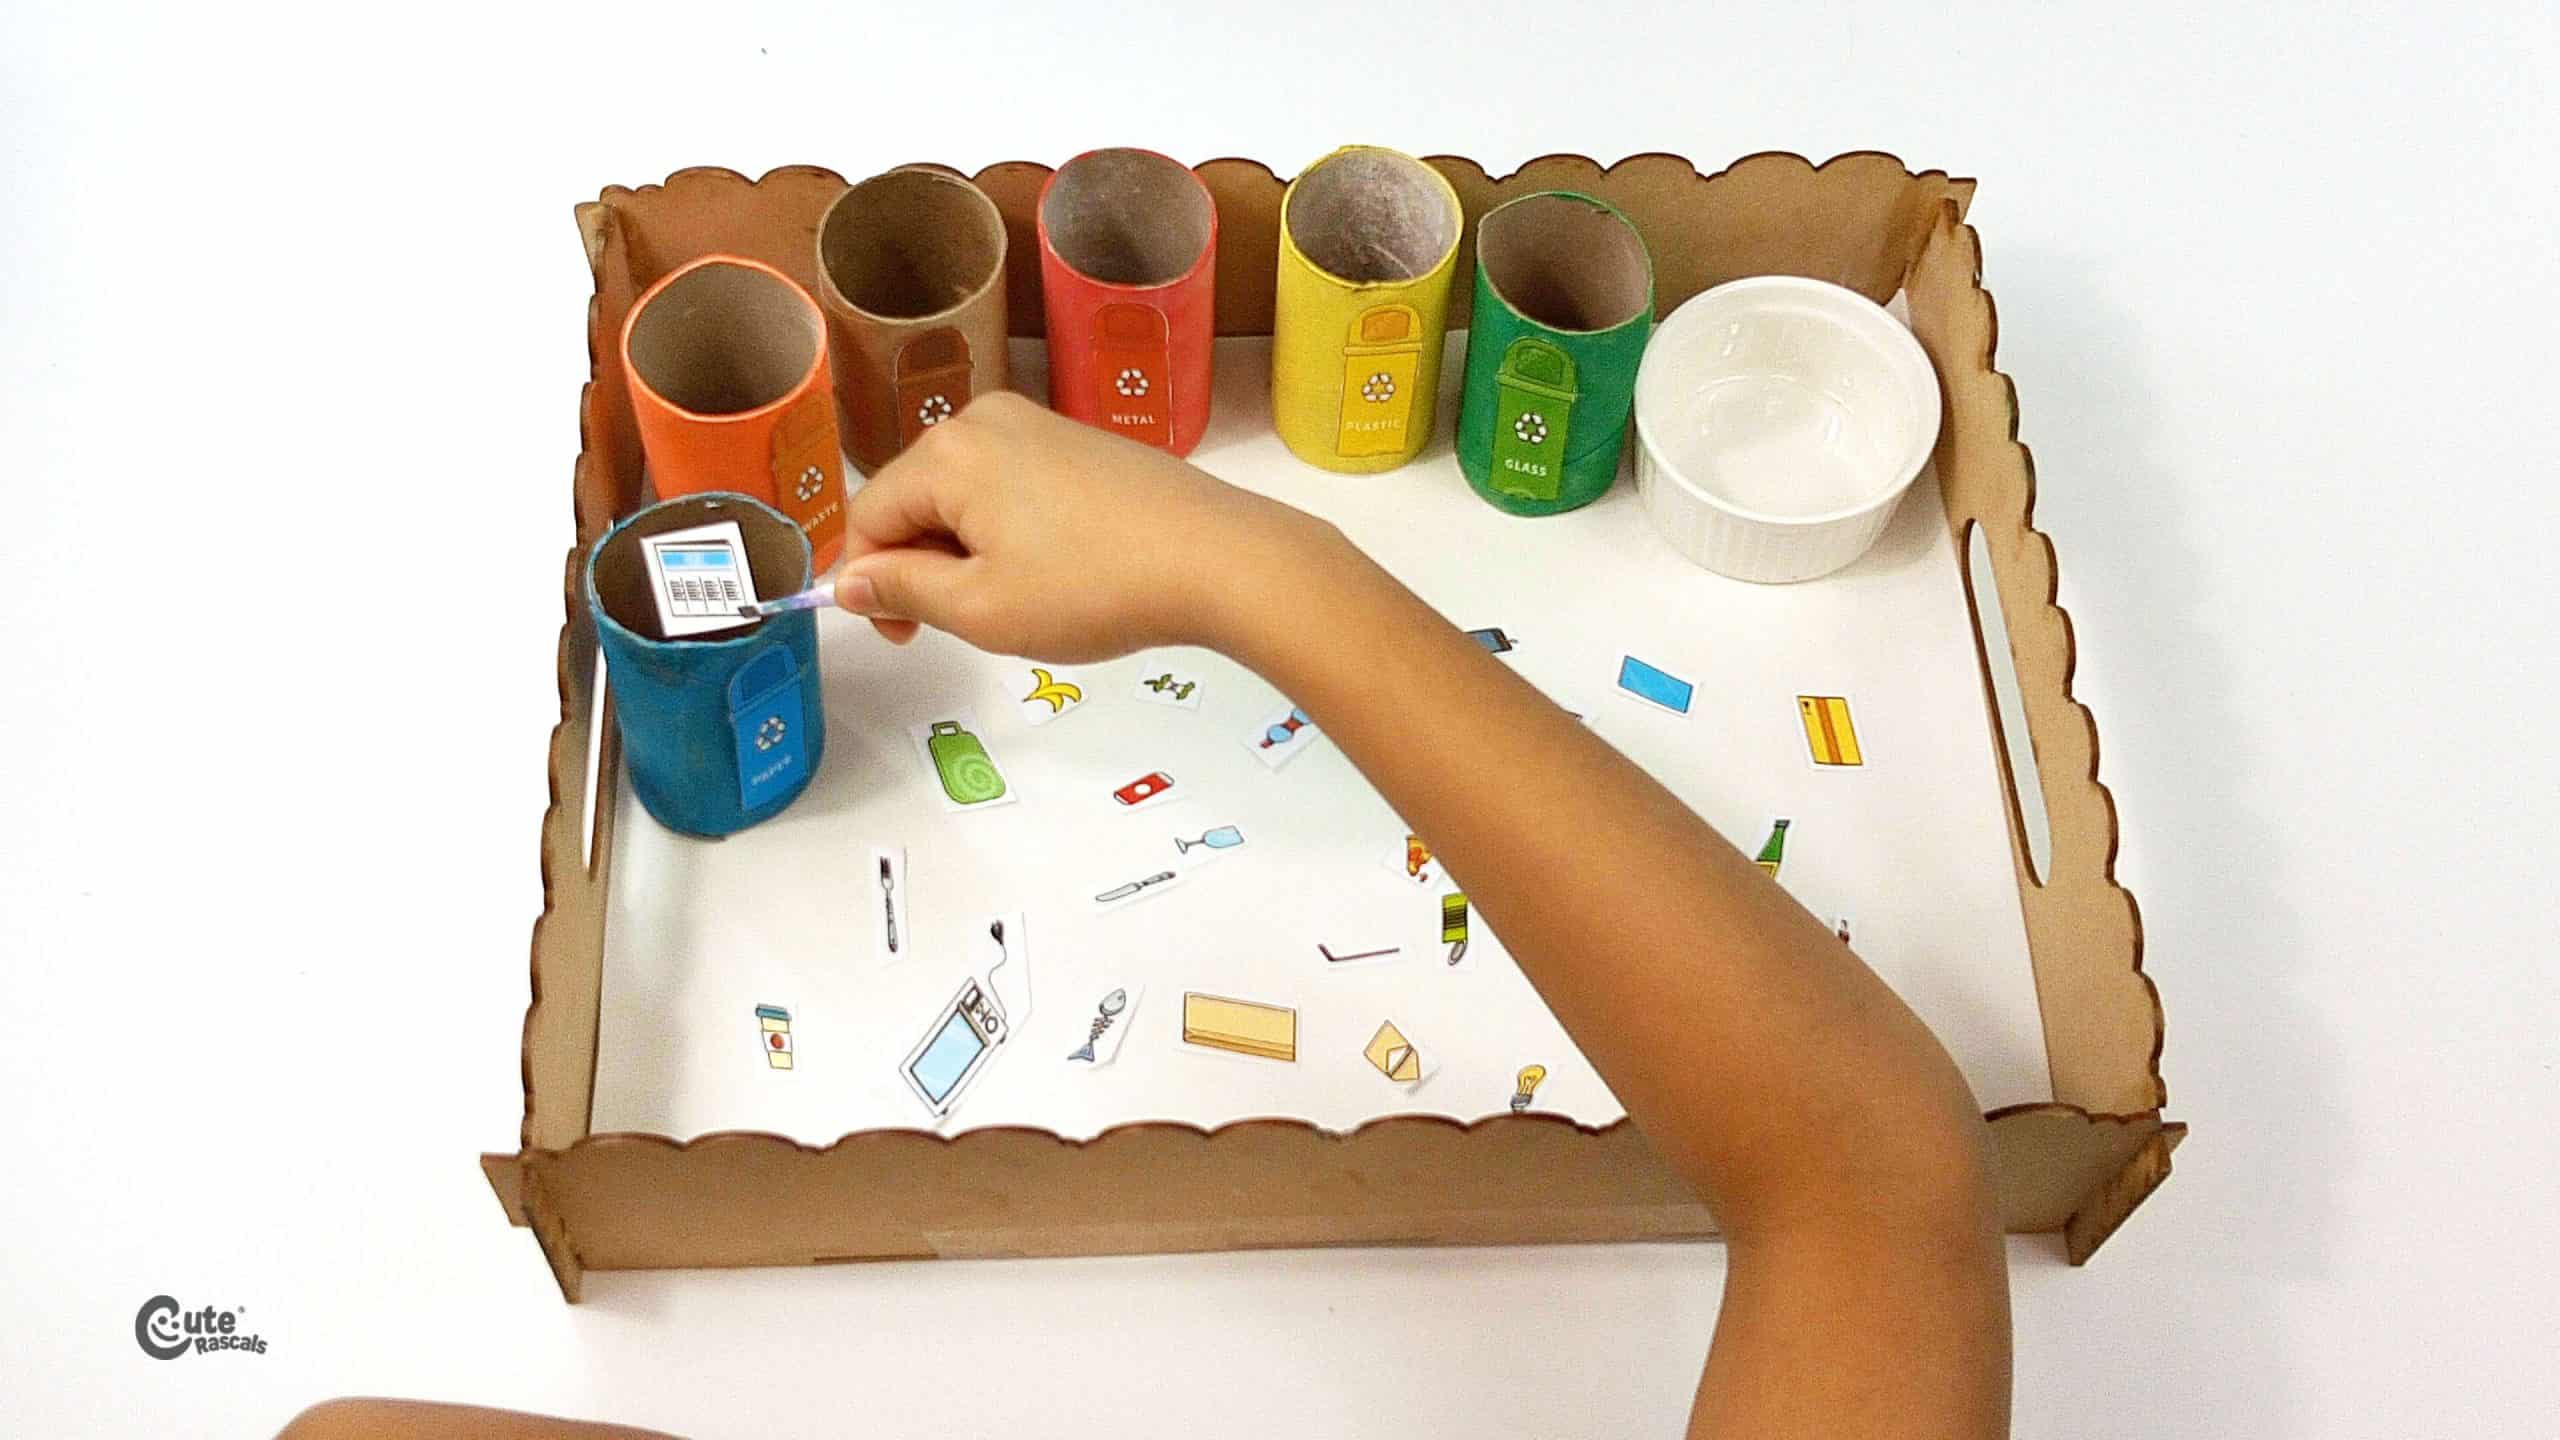 Place the waste images within the cardboard tubes